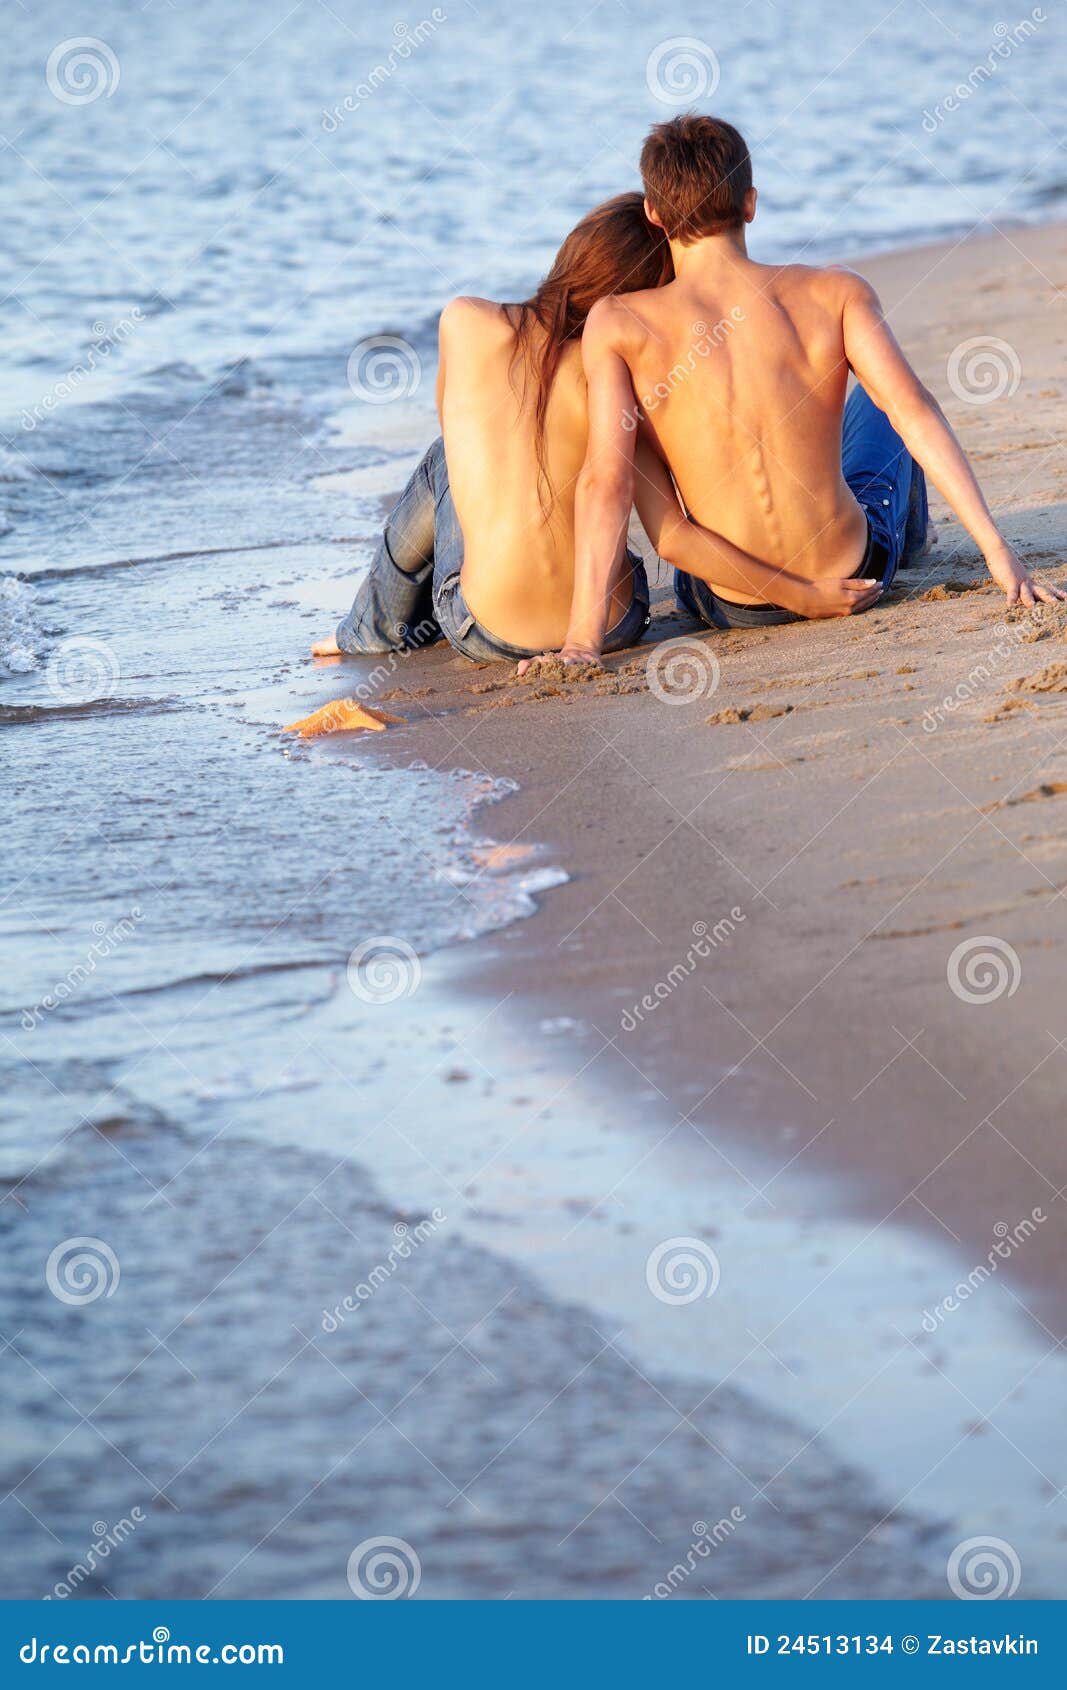 Couple at the beach stock photo pic